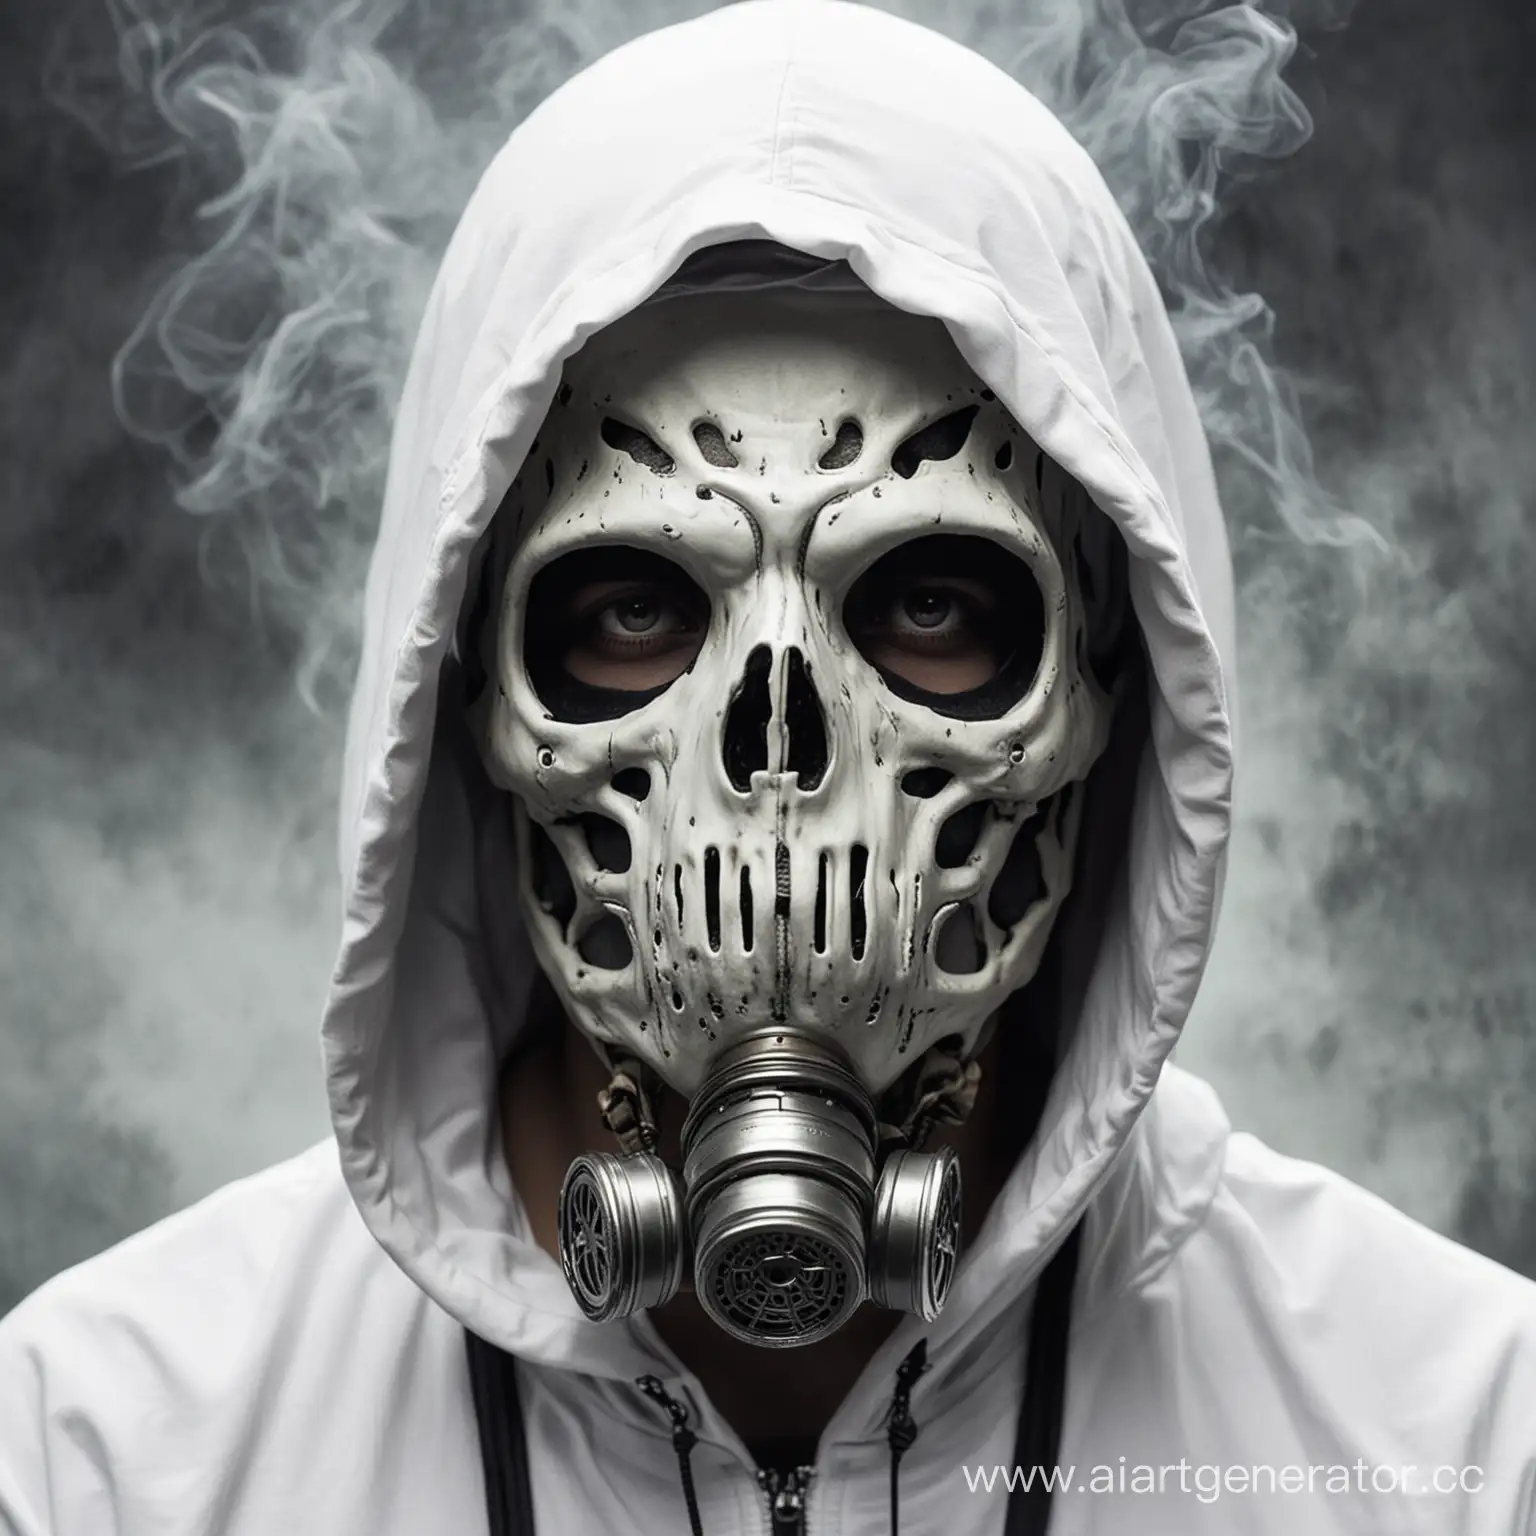 Mysterious-Skeleton-Figure-in-White-Hood-and-Gas-Mask